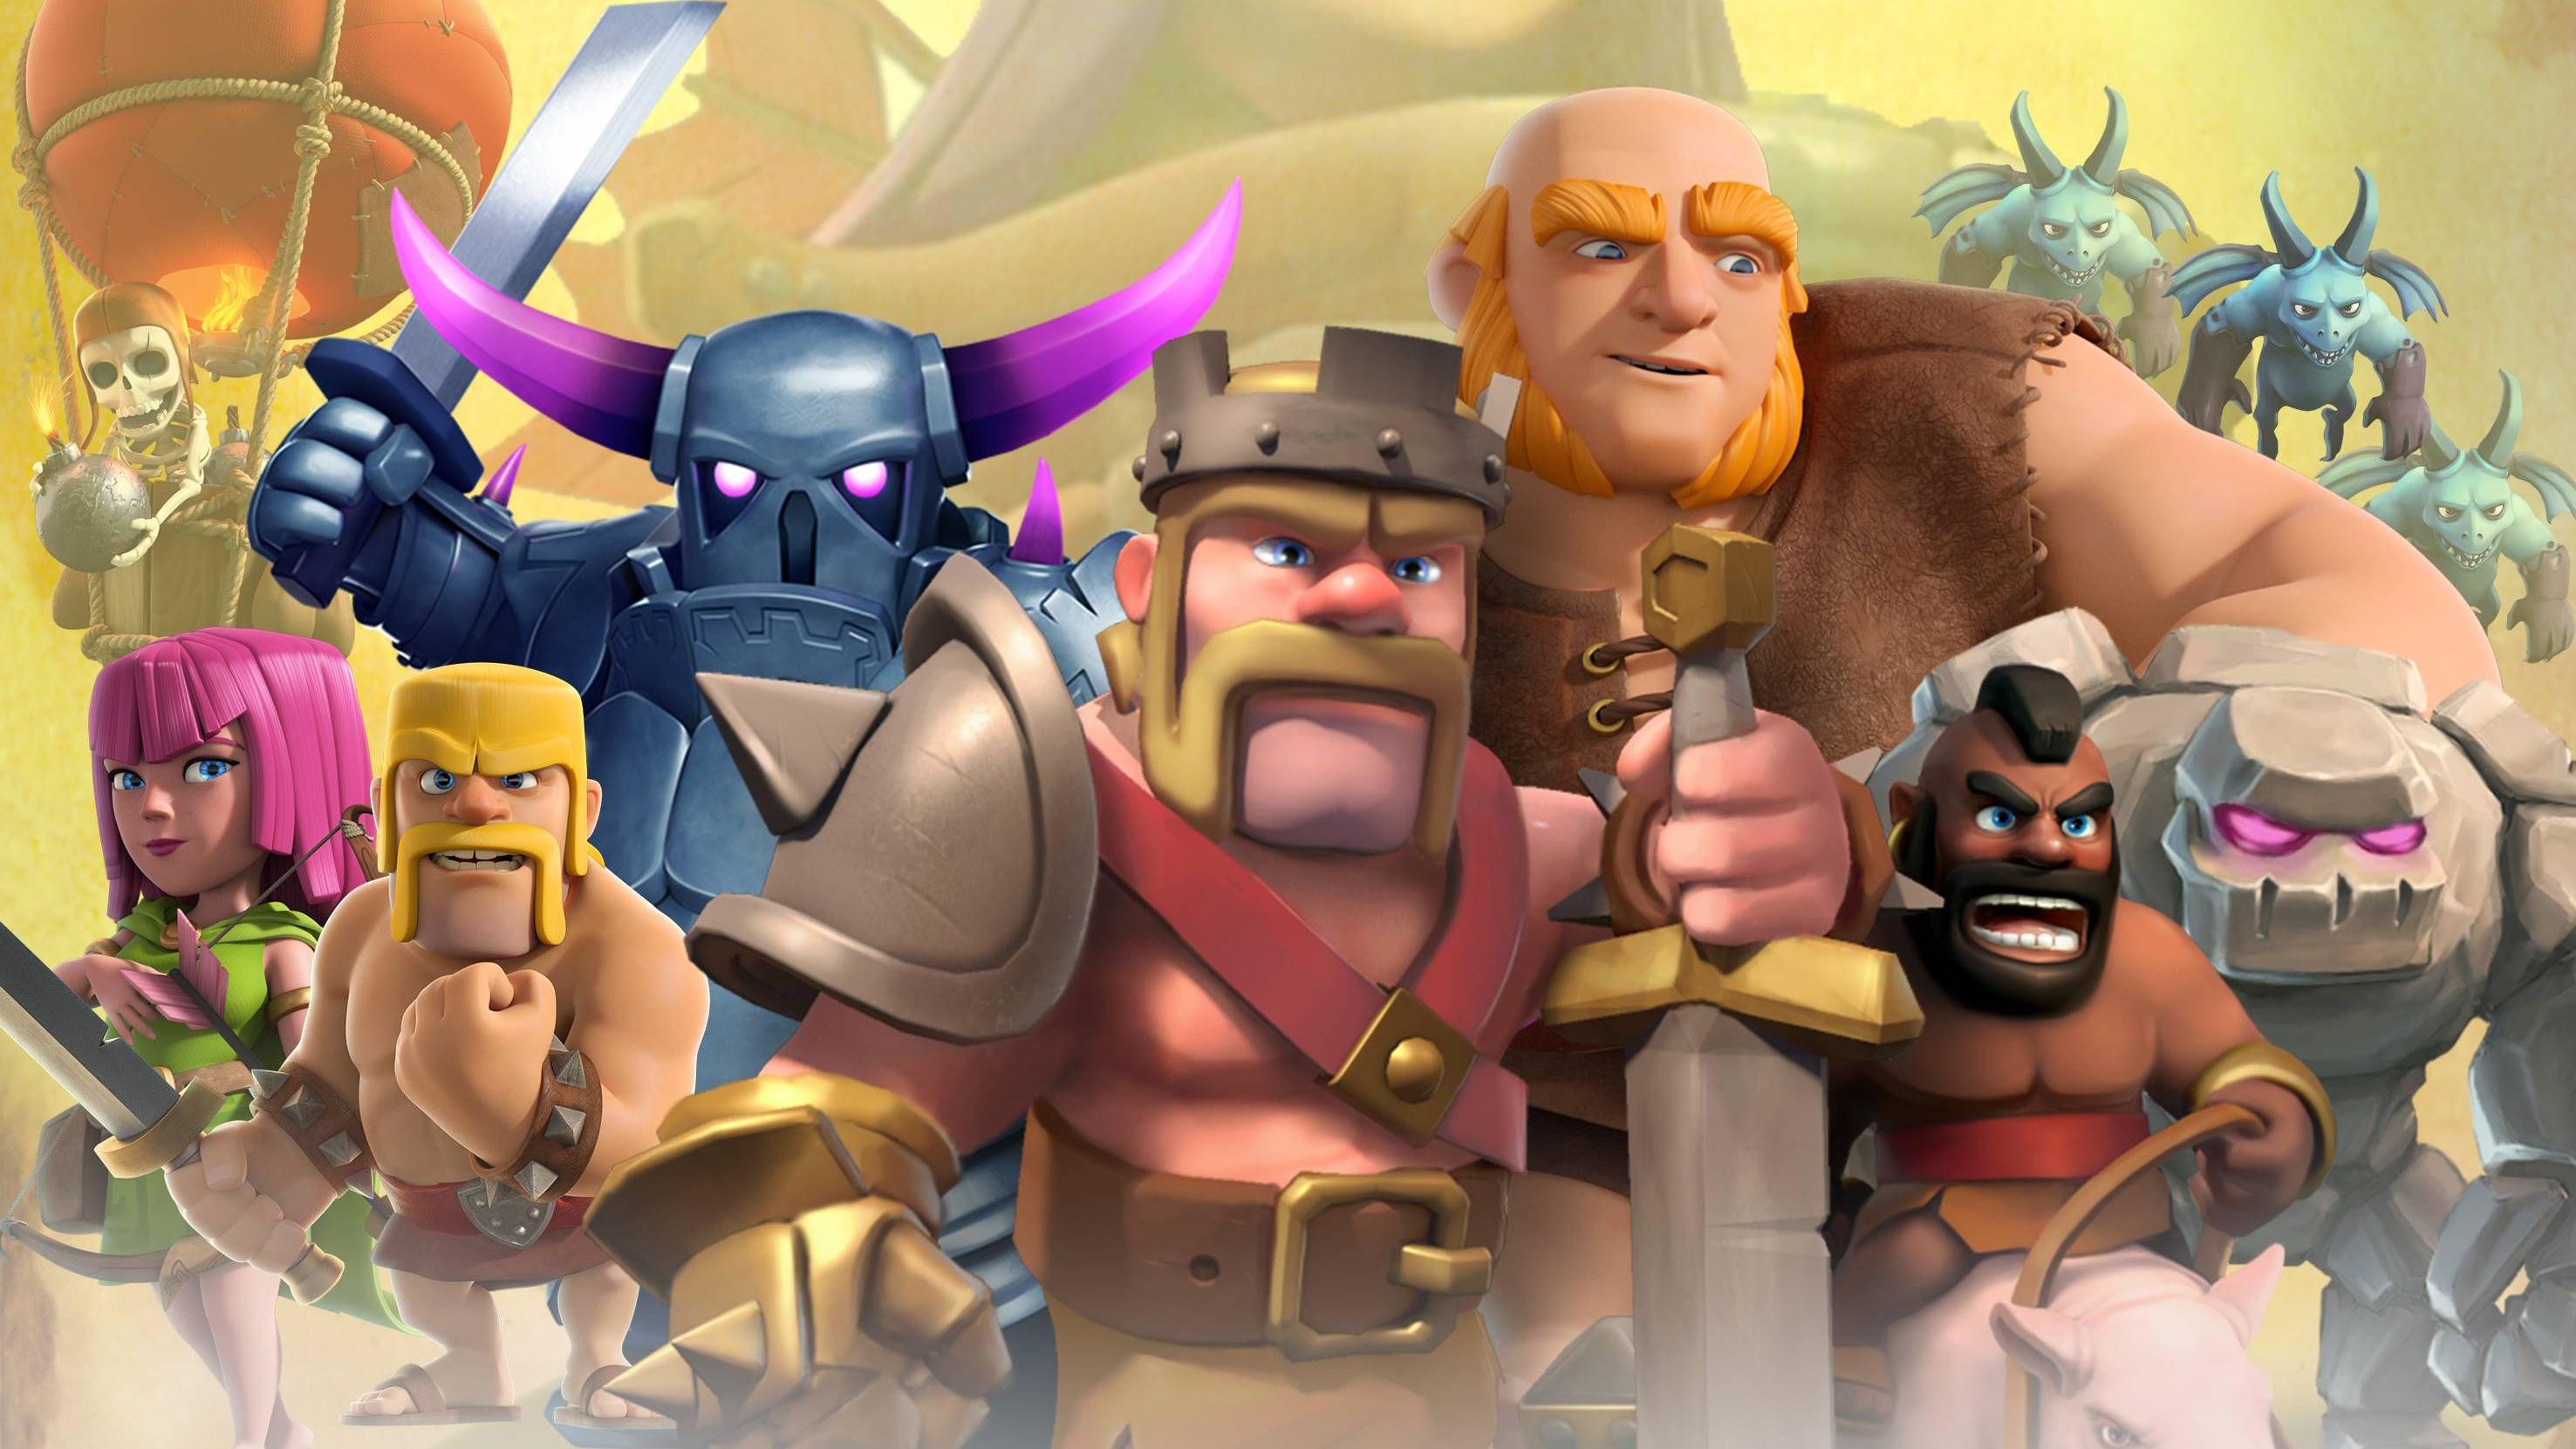 HD wallpaper, Games Wallpapers, Hd Wallpapers, Clash Of Clans Mobile Game, Hog Rider Wallpapers, Pekka Wallpapers, Supercell Wallpapers, Giant Wallpapers, Archer Wallpapers, Clash Of Clans Wallpapers, Barbarian Wallpapers